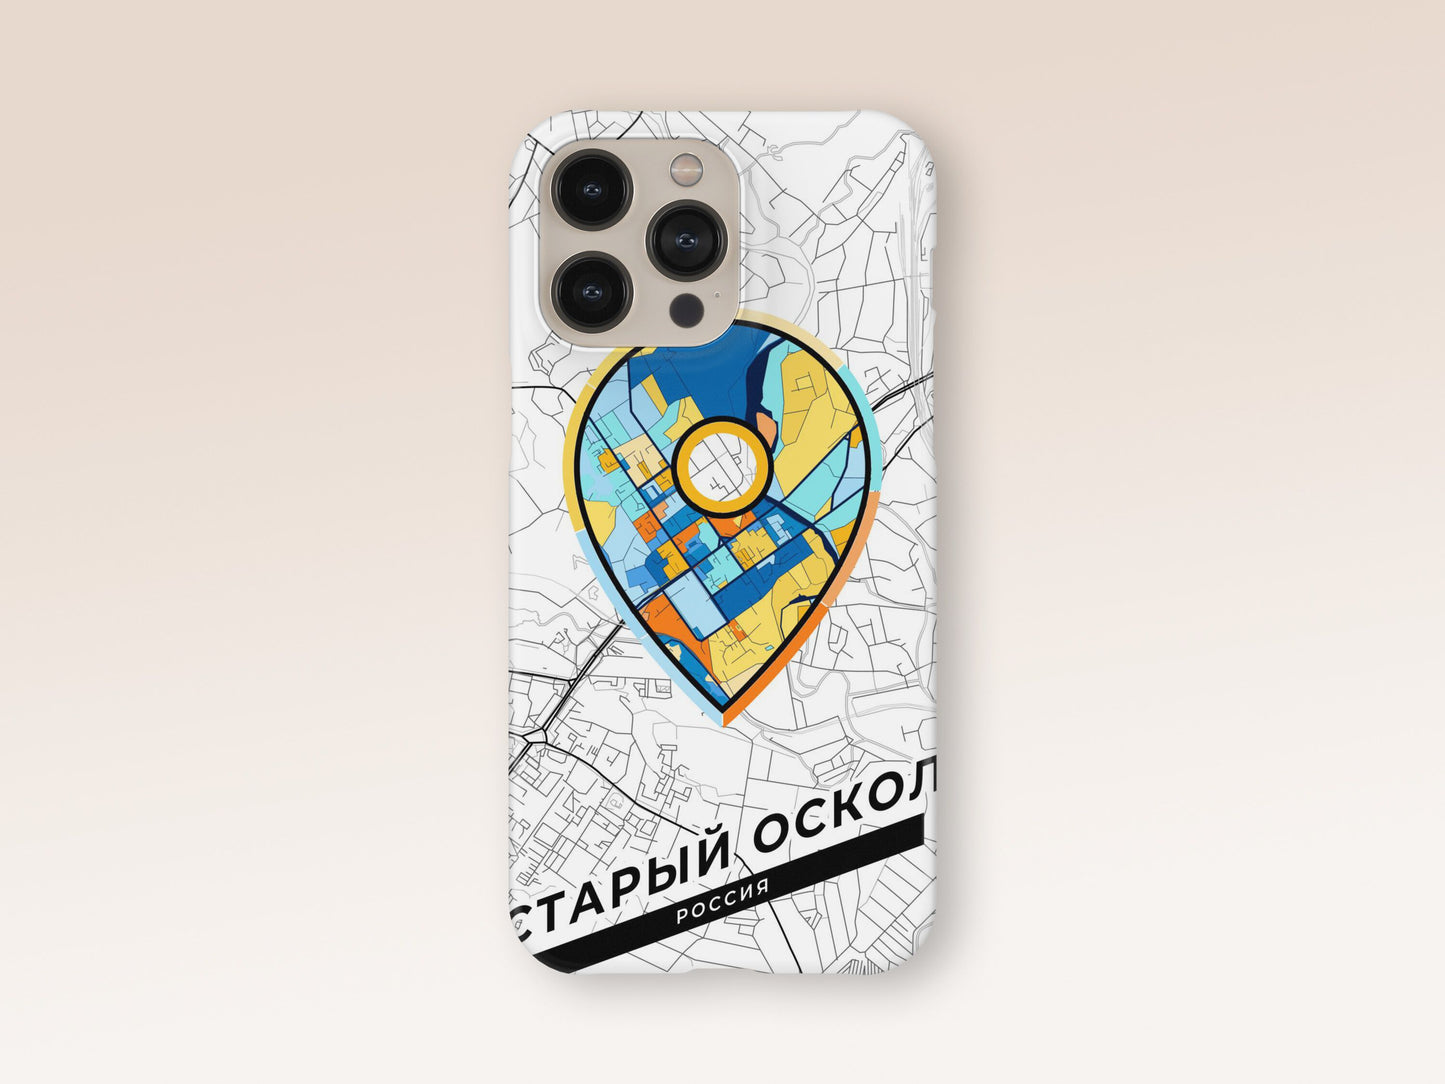 Stary Oskol Russia slim phone case with colorful icon 1